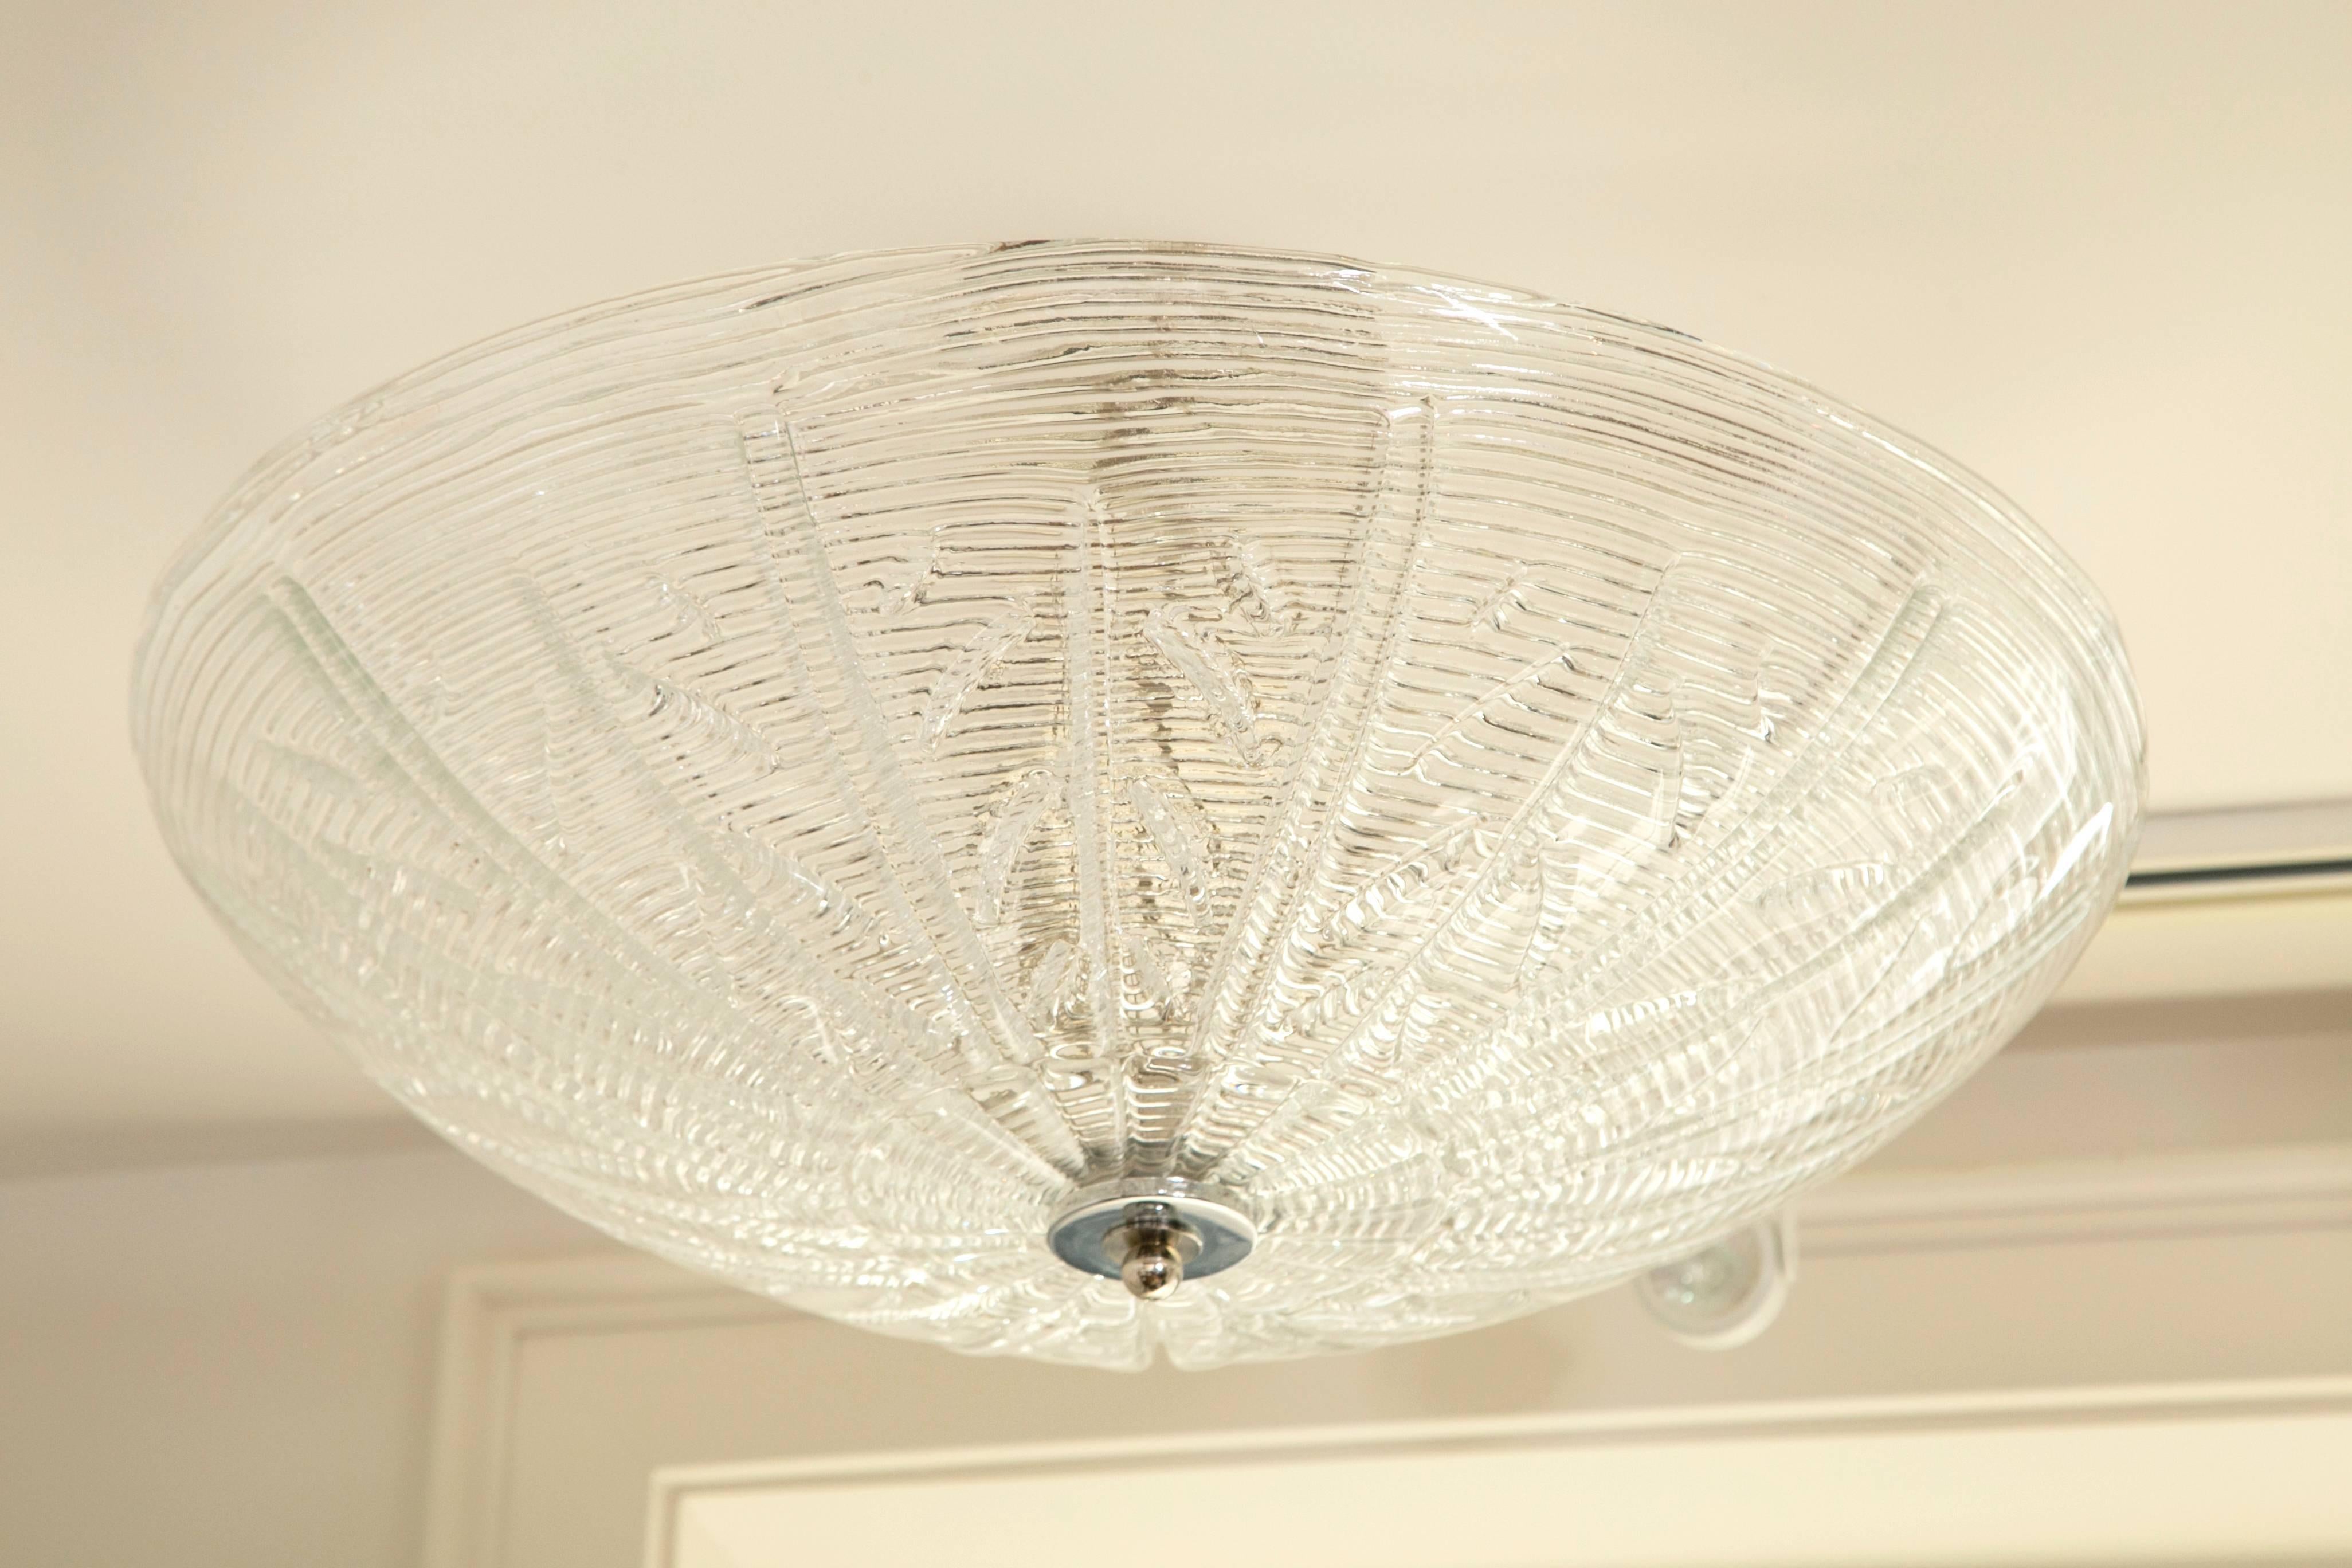 Striking Murano blown ceiling fixture shown with a ribbed and a stylized leaf pattern.
Made install ready in nickel or brass fittings for near flush, semi flush or pendant lighting- overall drop is custom fitted to your desired drop
Note -while this